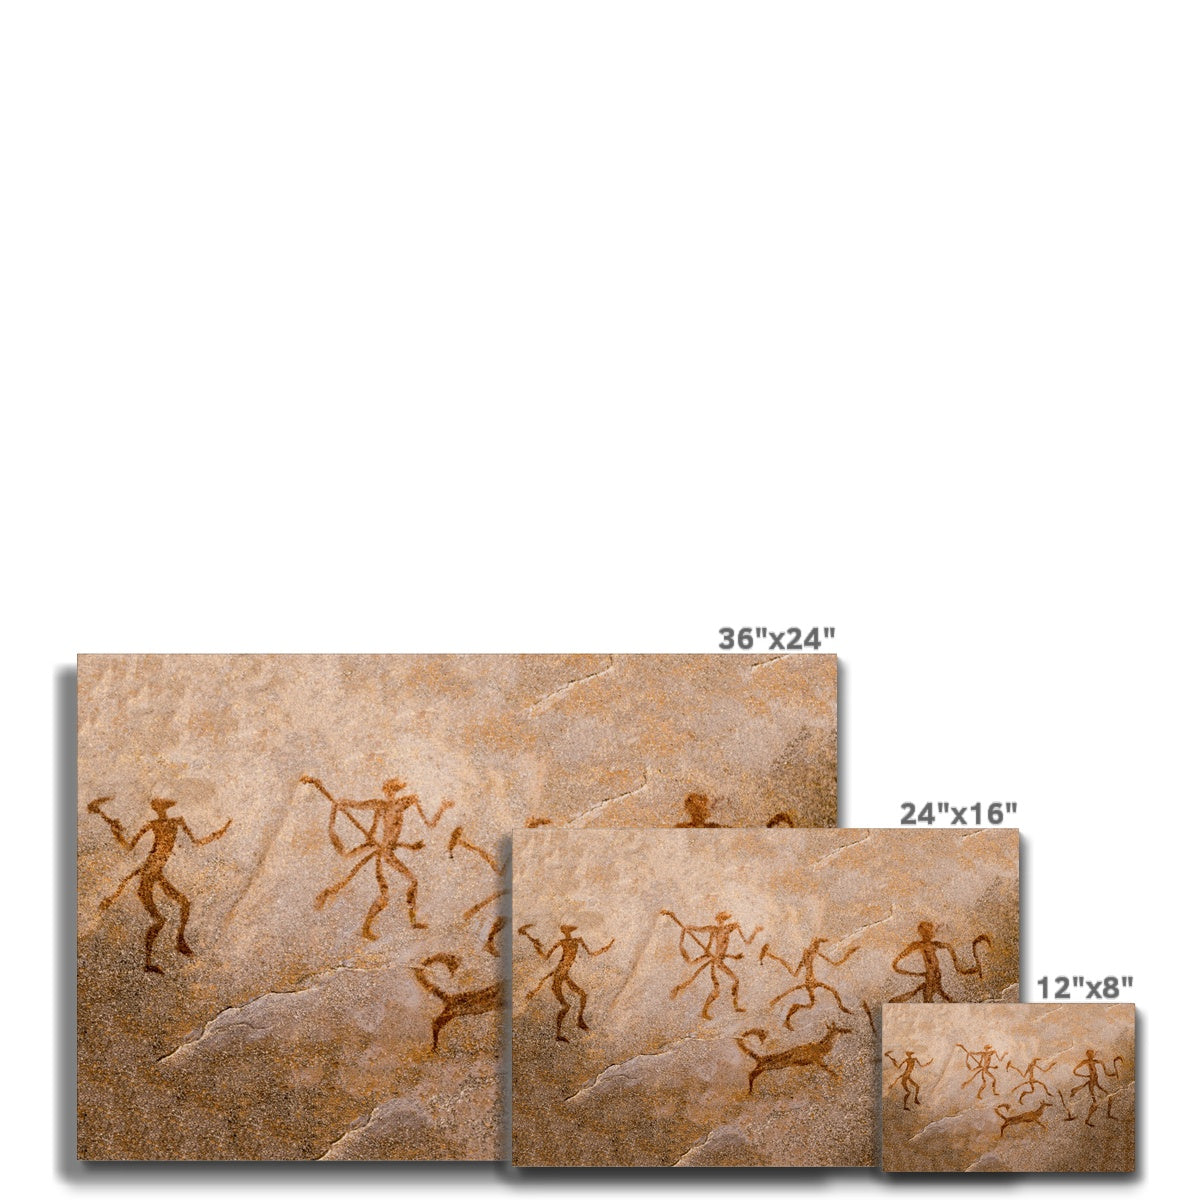 Personalized Cave Artwork Canvas